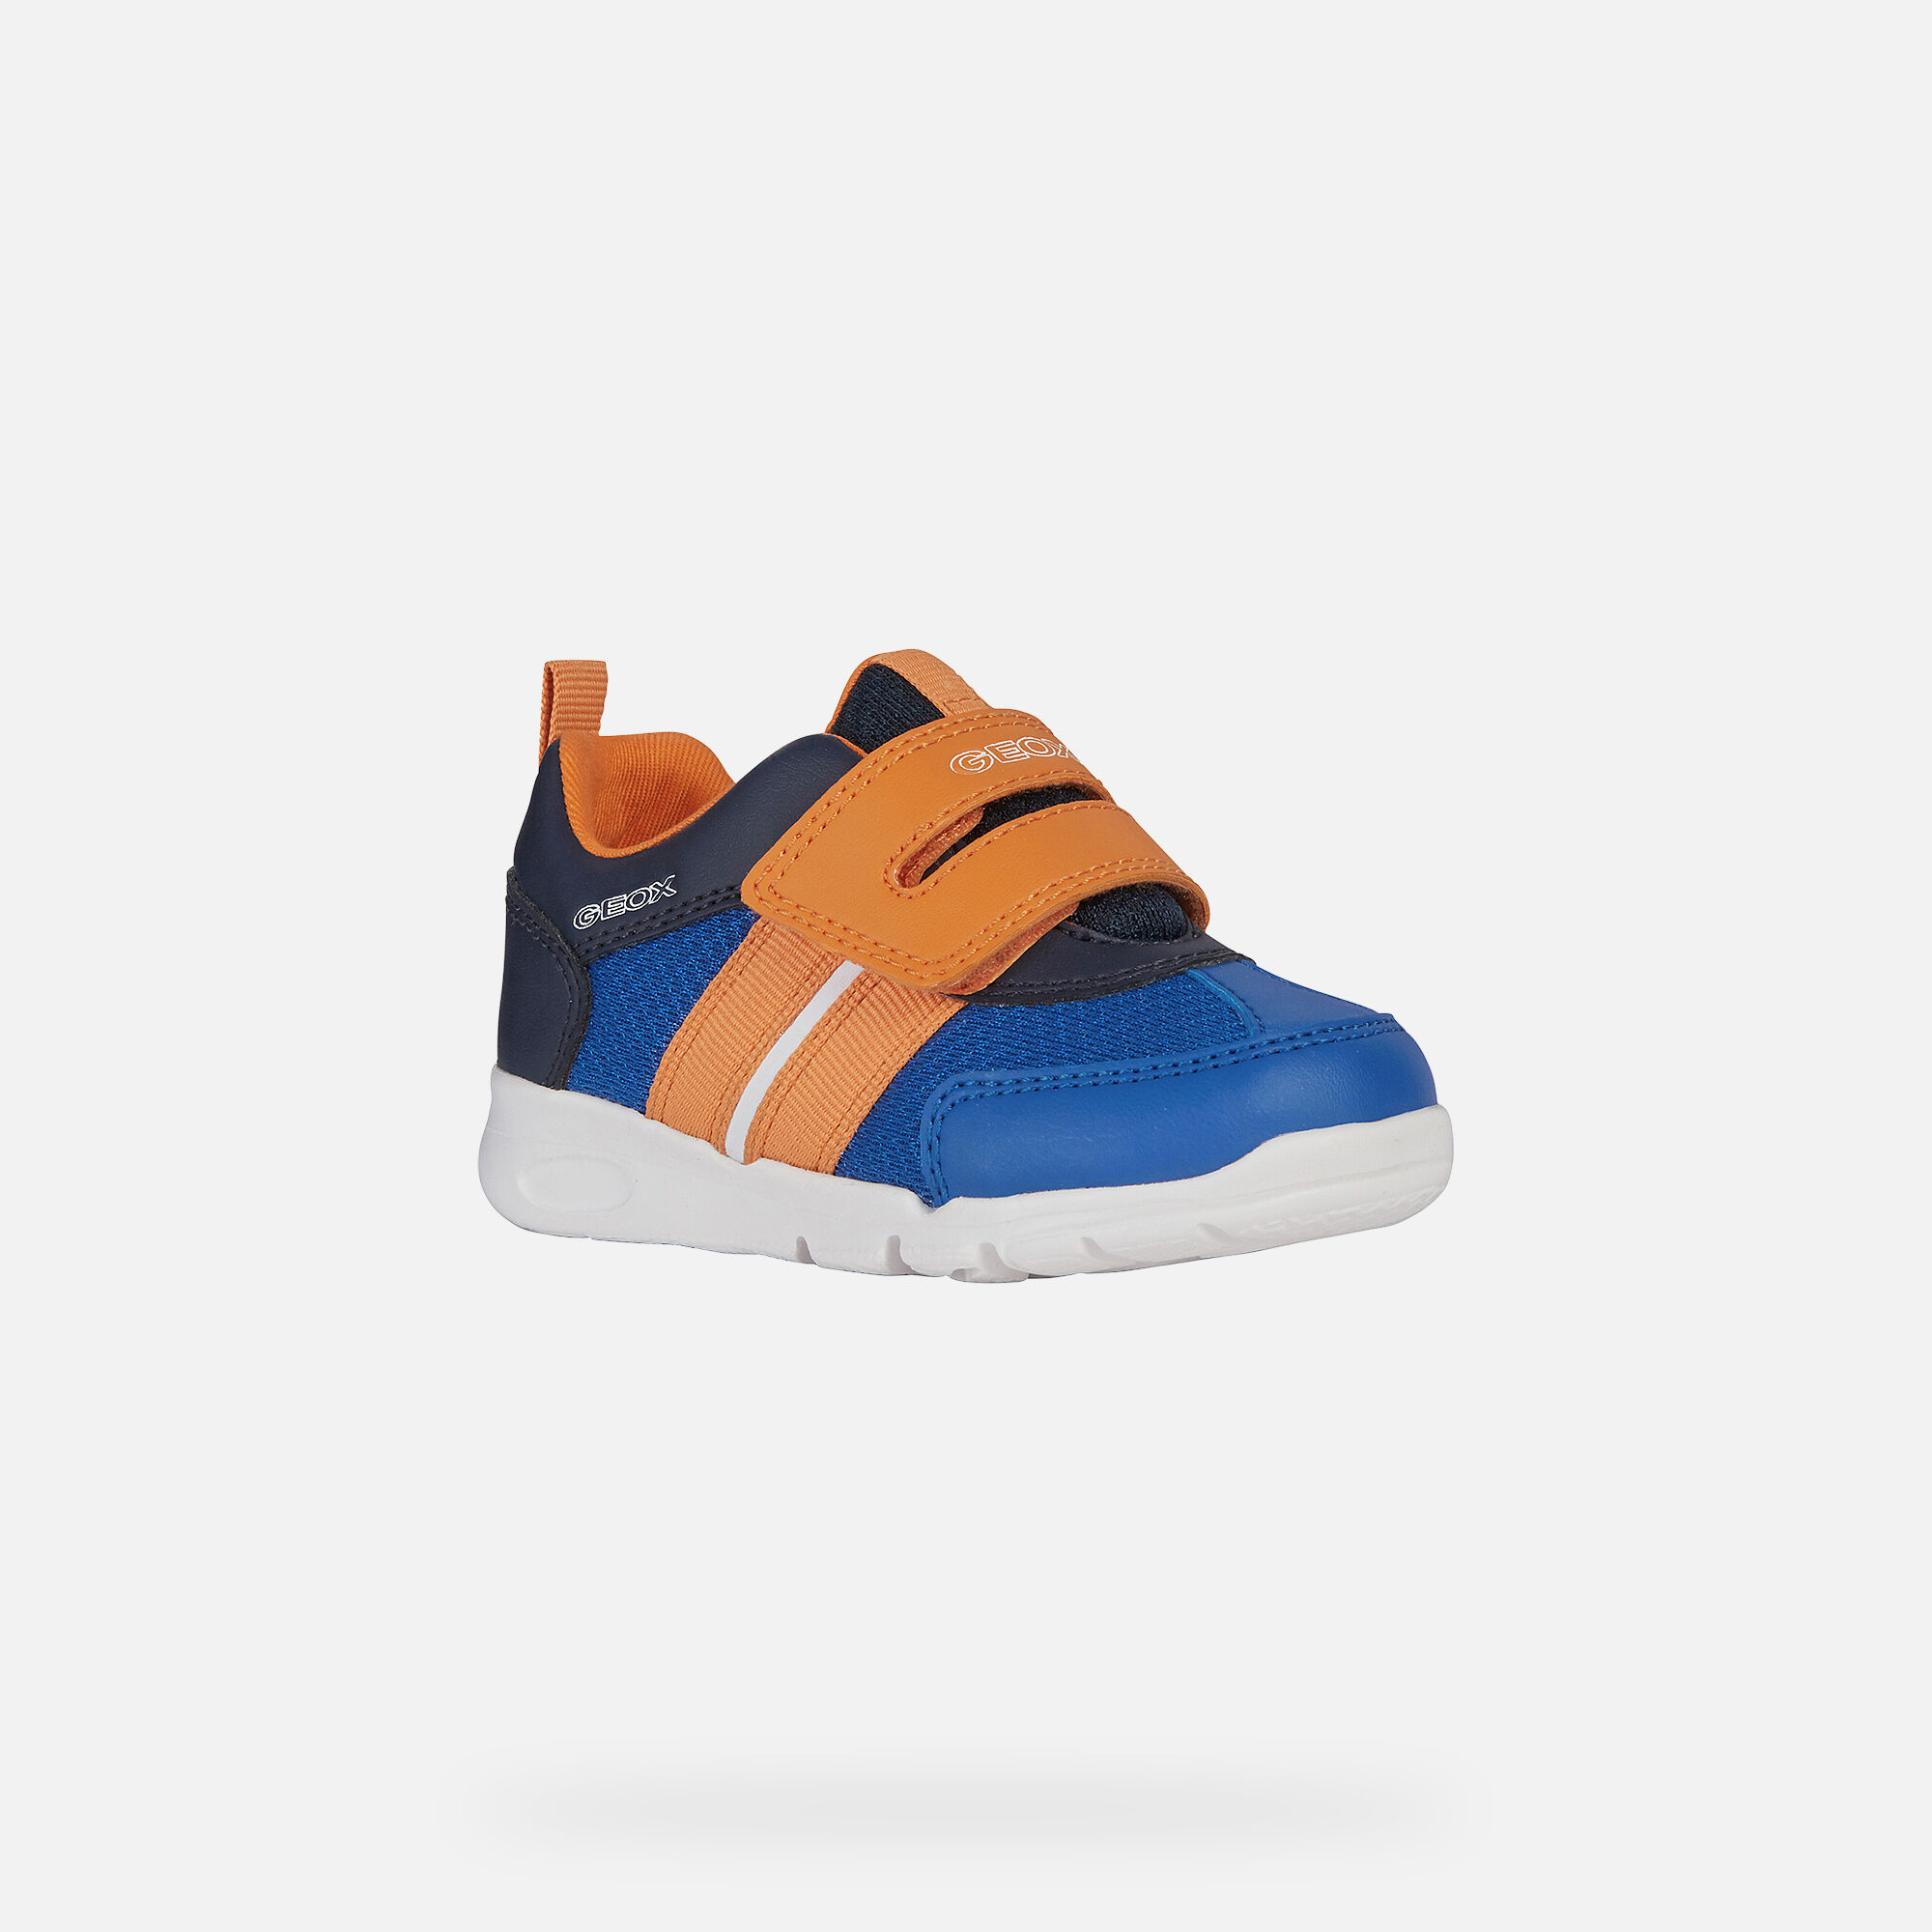 Geox® RUNNER Baby Boy: Royal blue and 